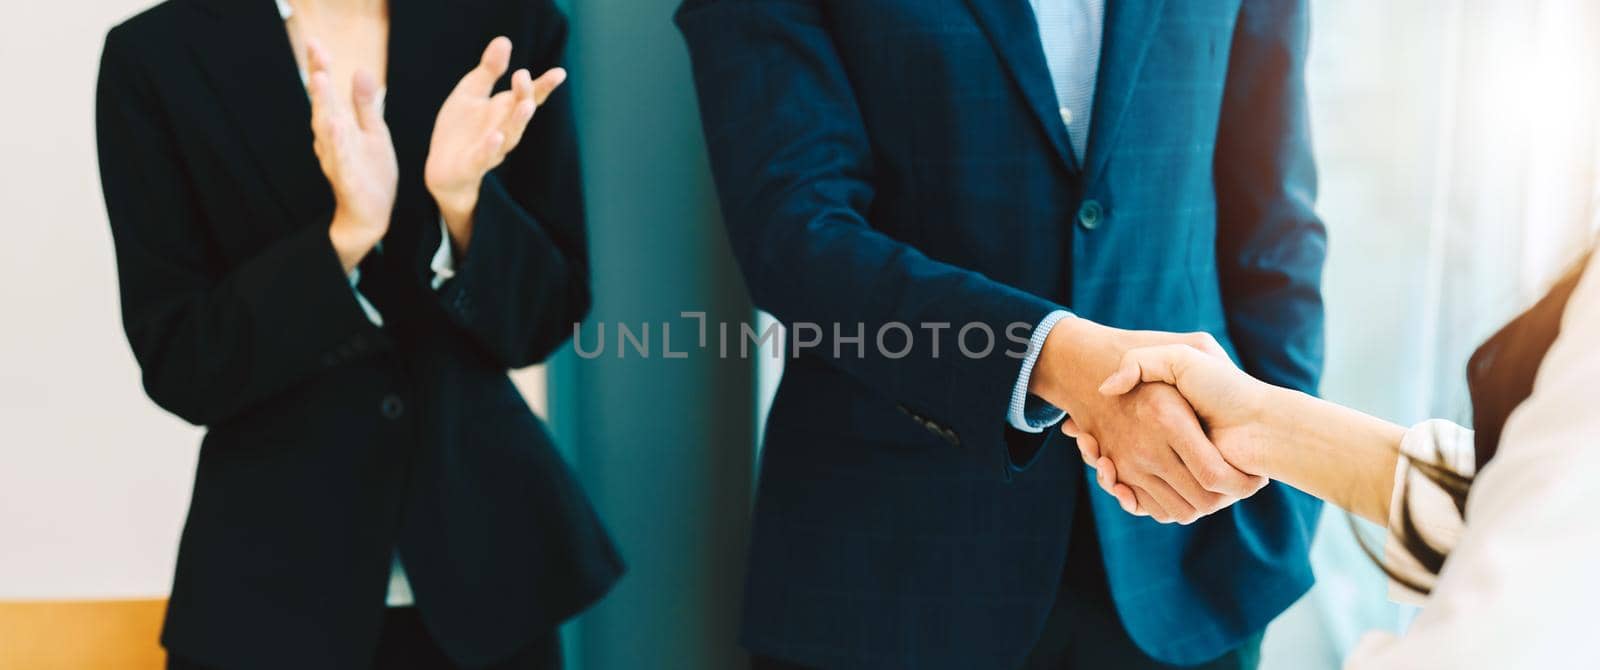 business woman applause and congrat while two business people shaking their hand after making deal or agreement. working and success Concept. by nateemee